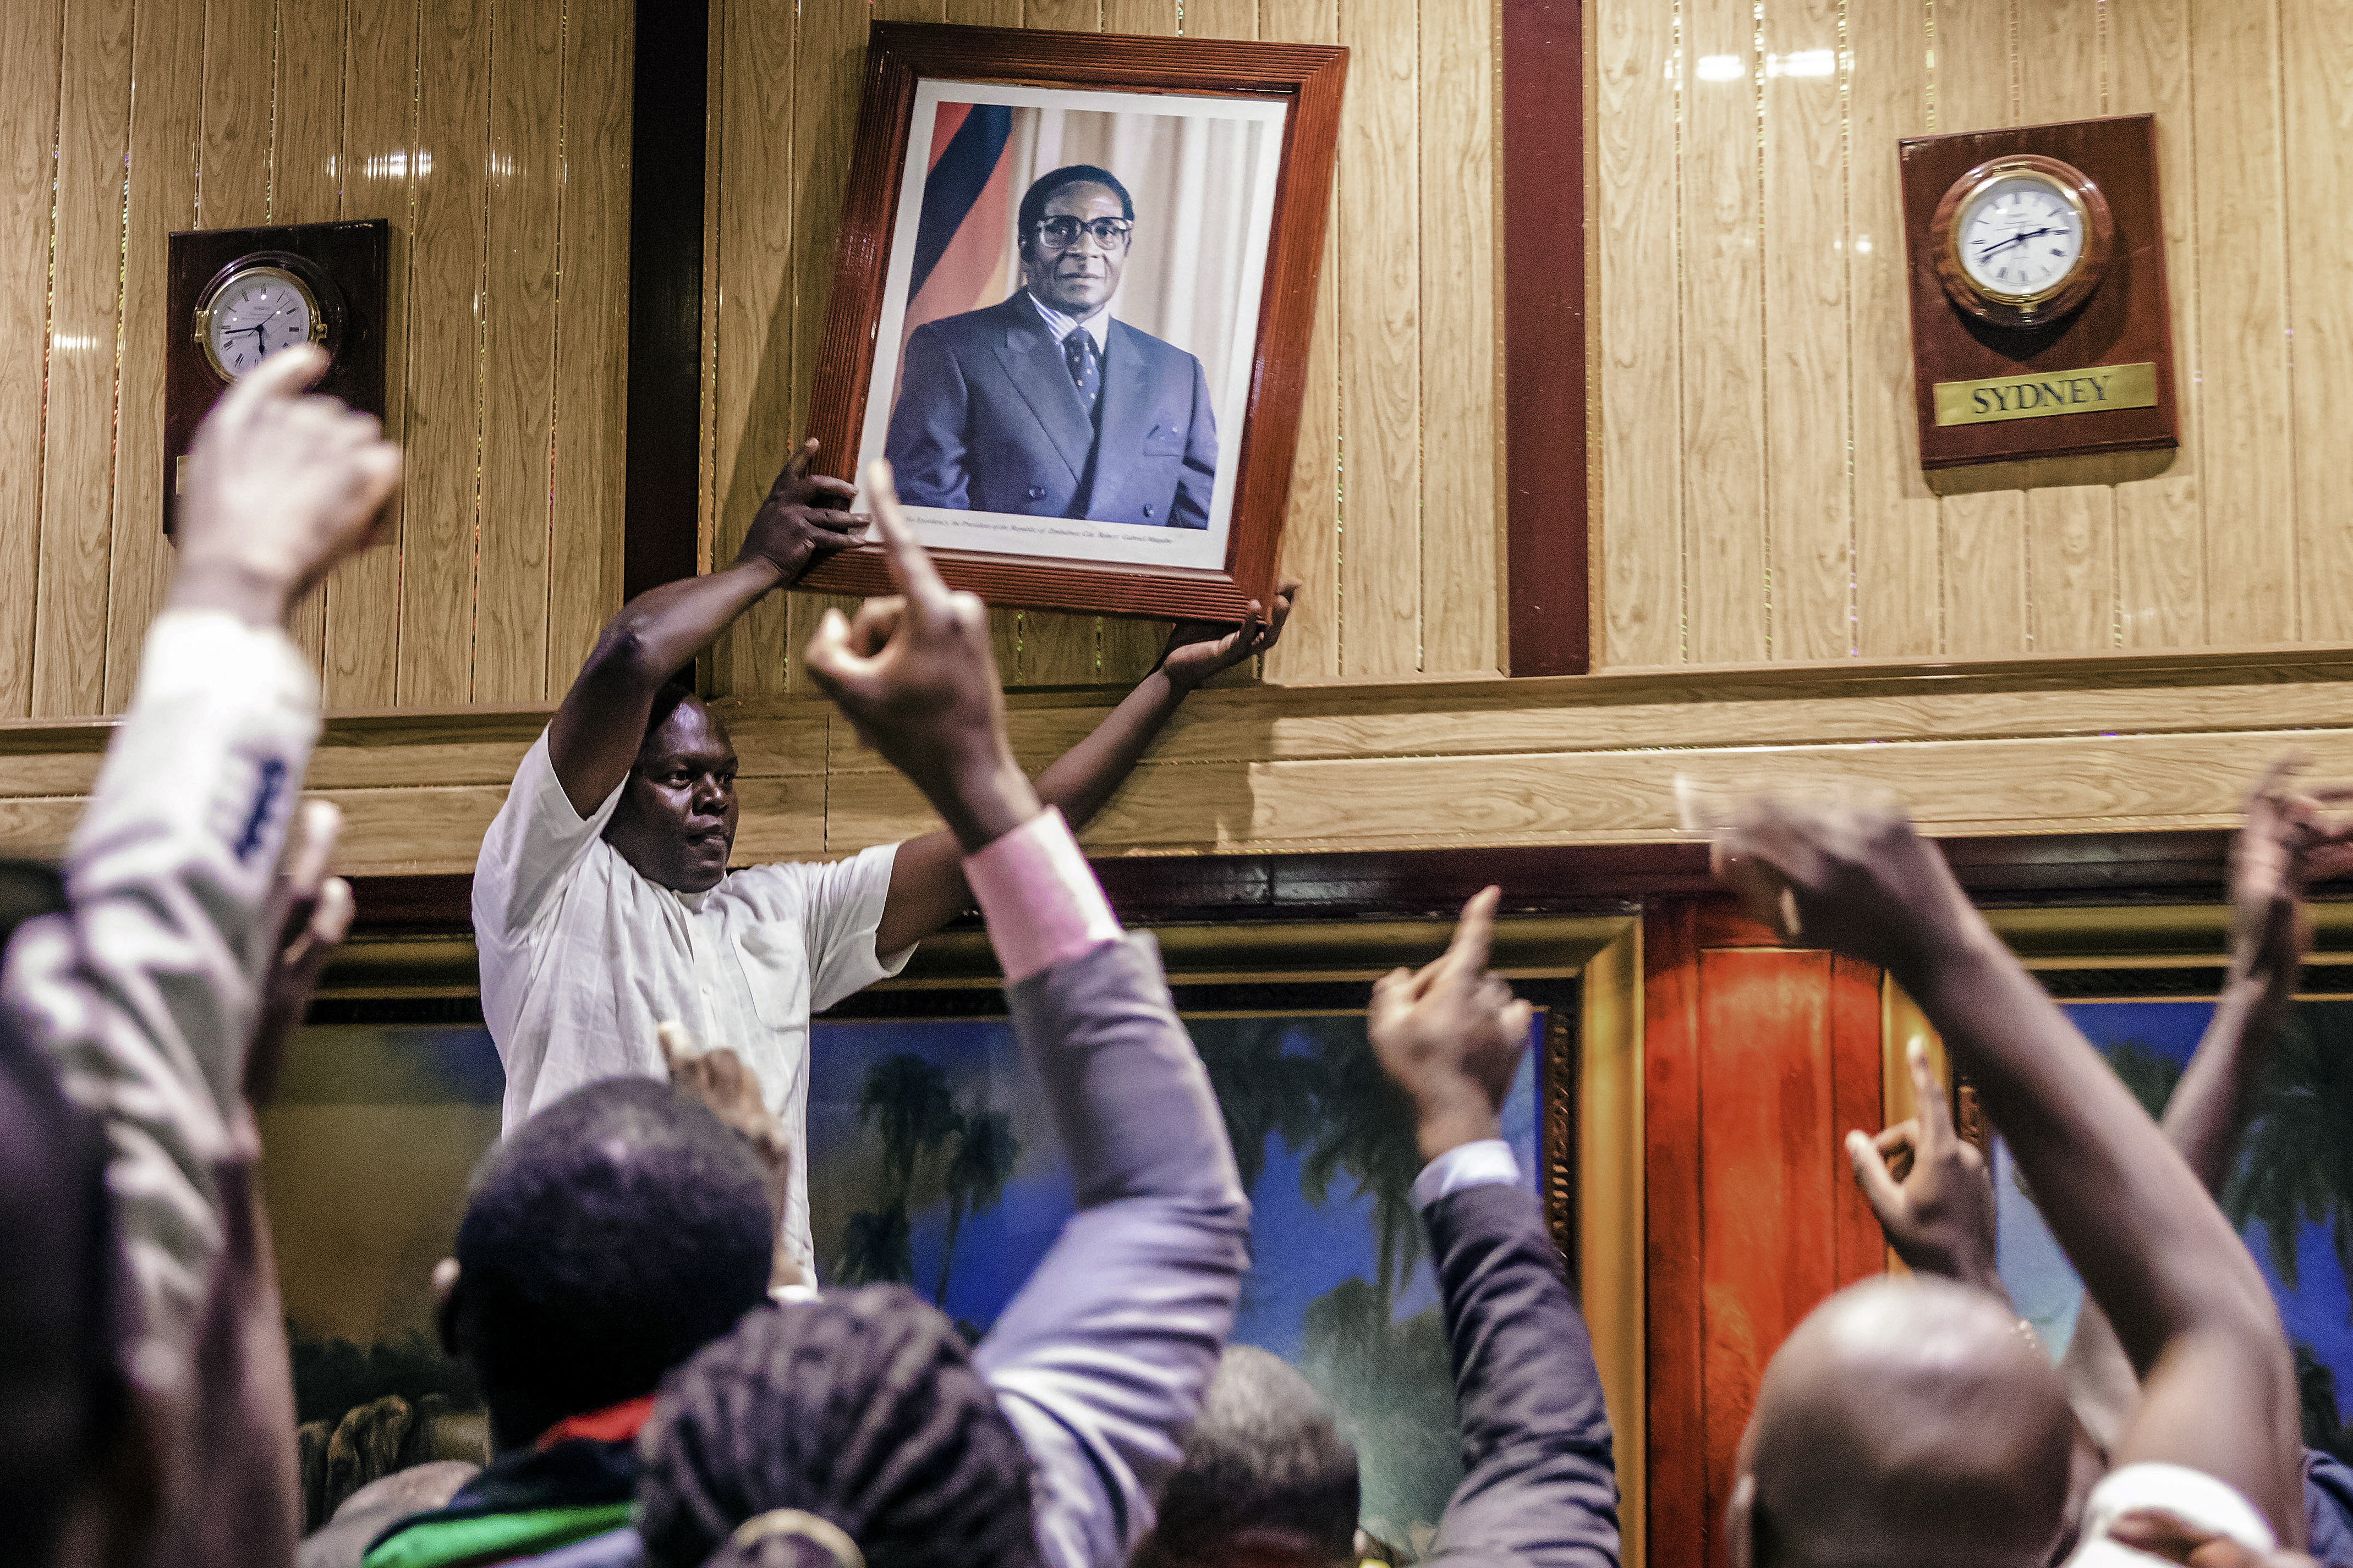 People remove, from the wall at the International Conference centre, where parliament had their sitting, the portrait of former Zimbabwean President Robert Mugabe after his resignation on November 21, 2017 in Harare..Robert Mugabe resigned as president of Zimbabwe on November 21, 2017 swept from power as his 37-year reign of brutality and